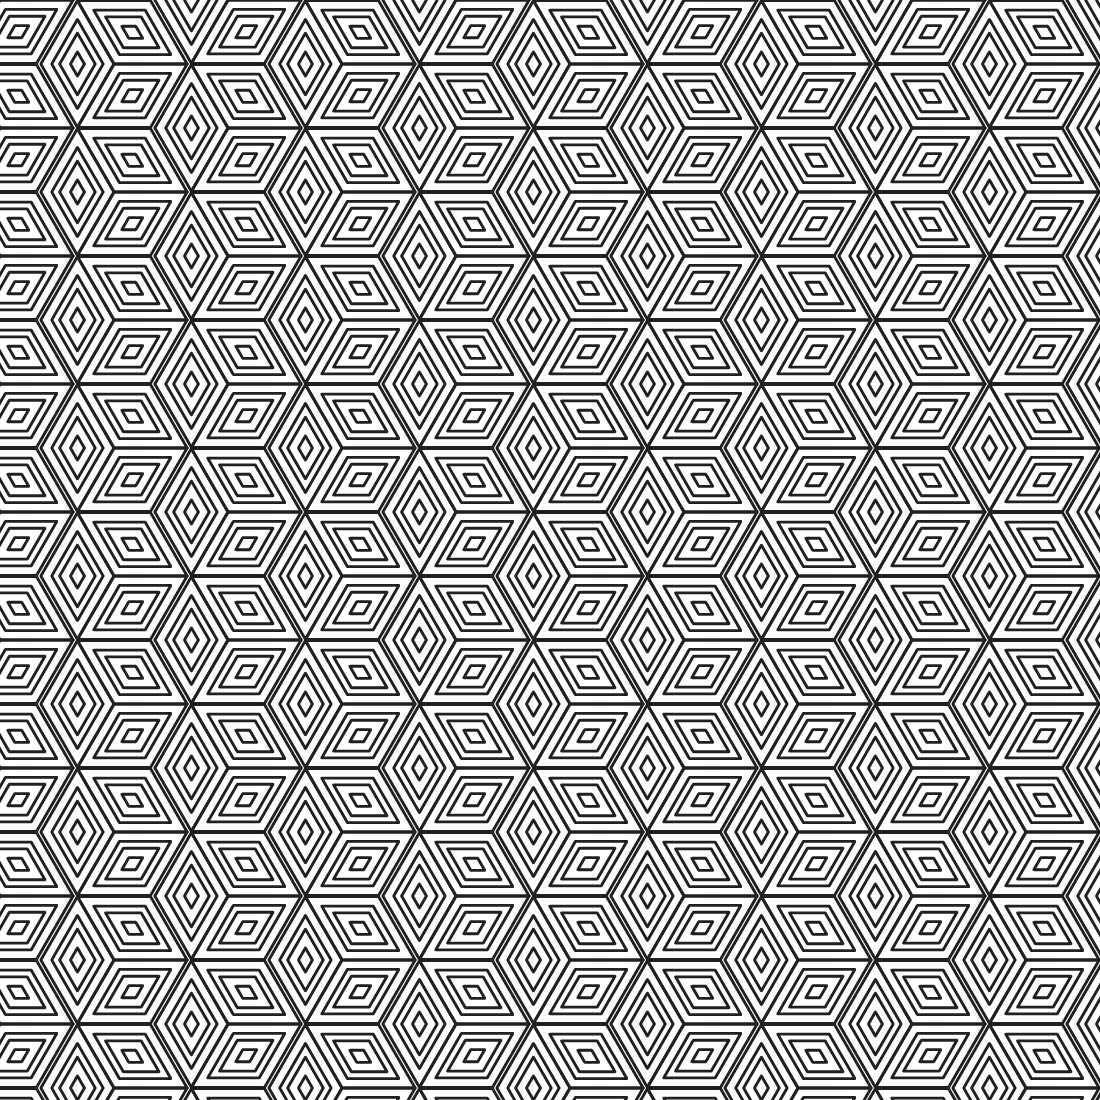 Great pattern design for your visual content.